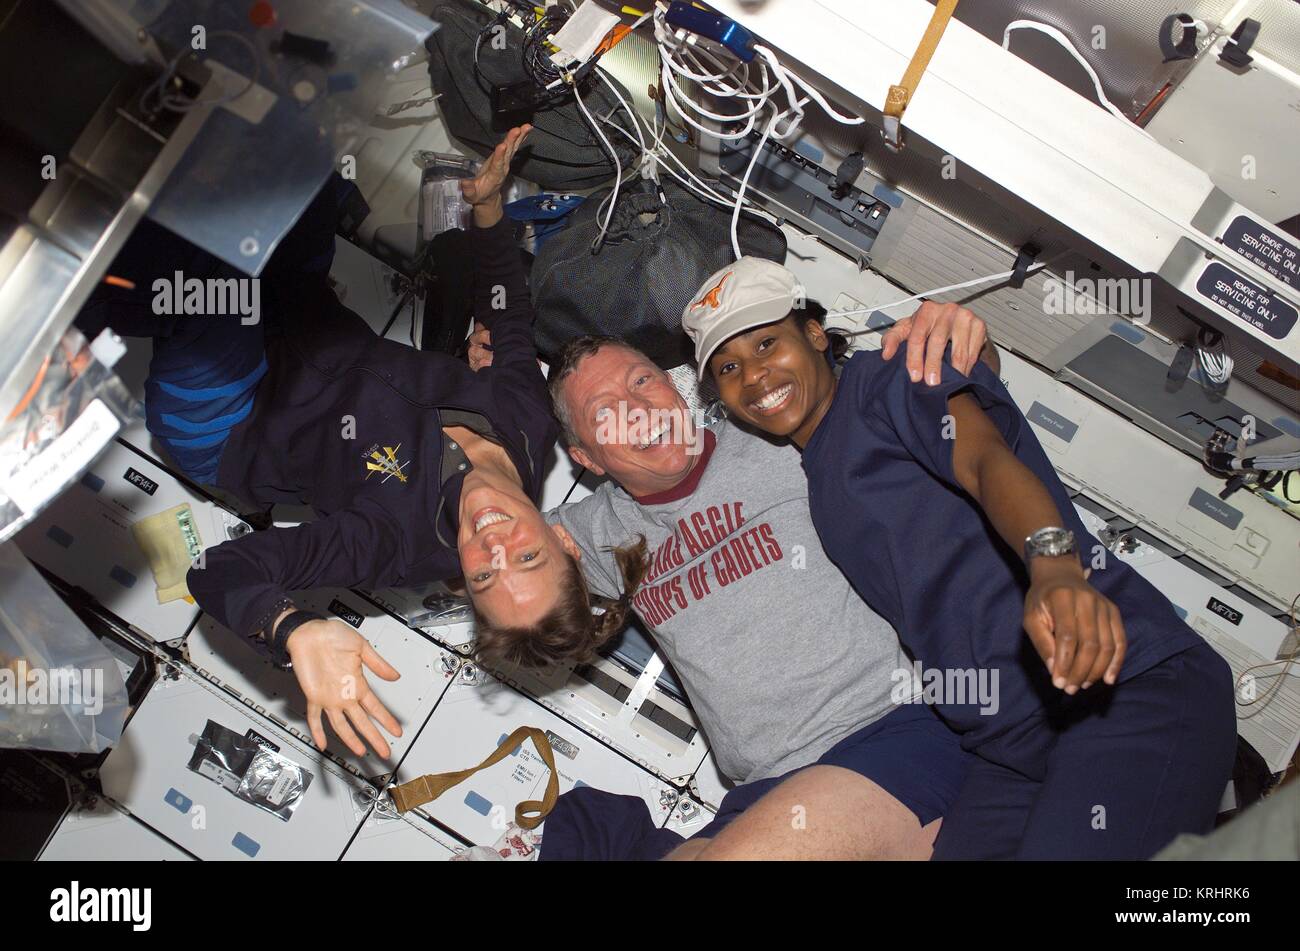 NASA Space Shuttle Discovery International Space Station STS-121 mission prime crew members American astronauts (L-R) Lisa Nowak, Michael Fossum, and Stephanie Wilson float in the Discovery middeck Airlock July 8, 2006 in Earth orbit. Stock Photo